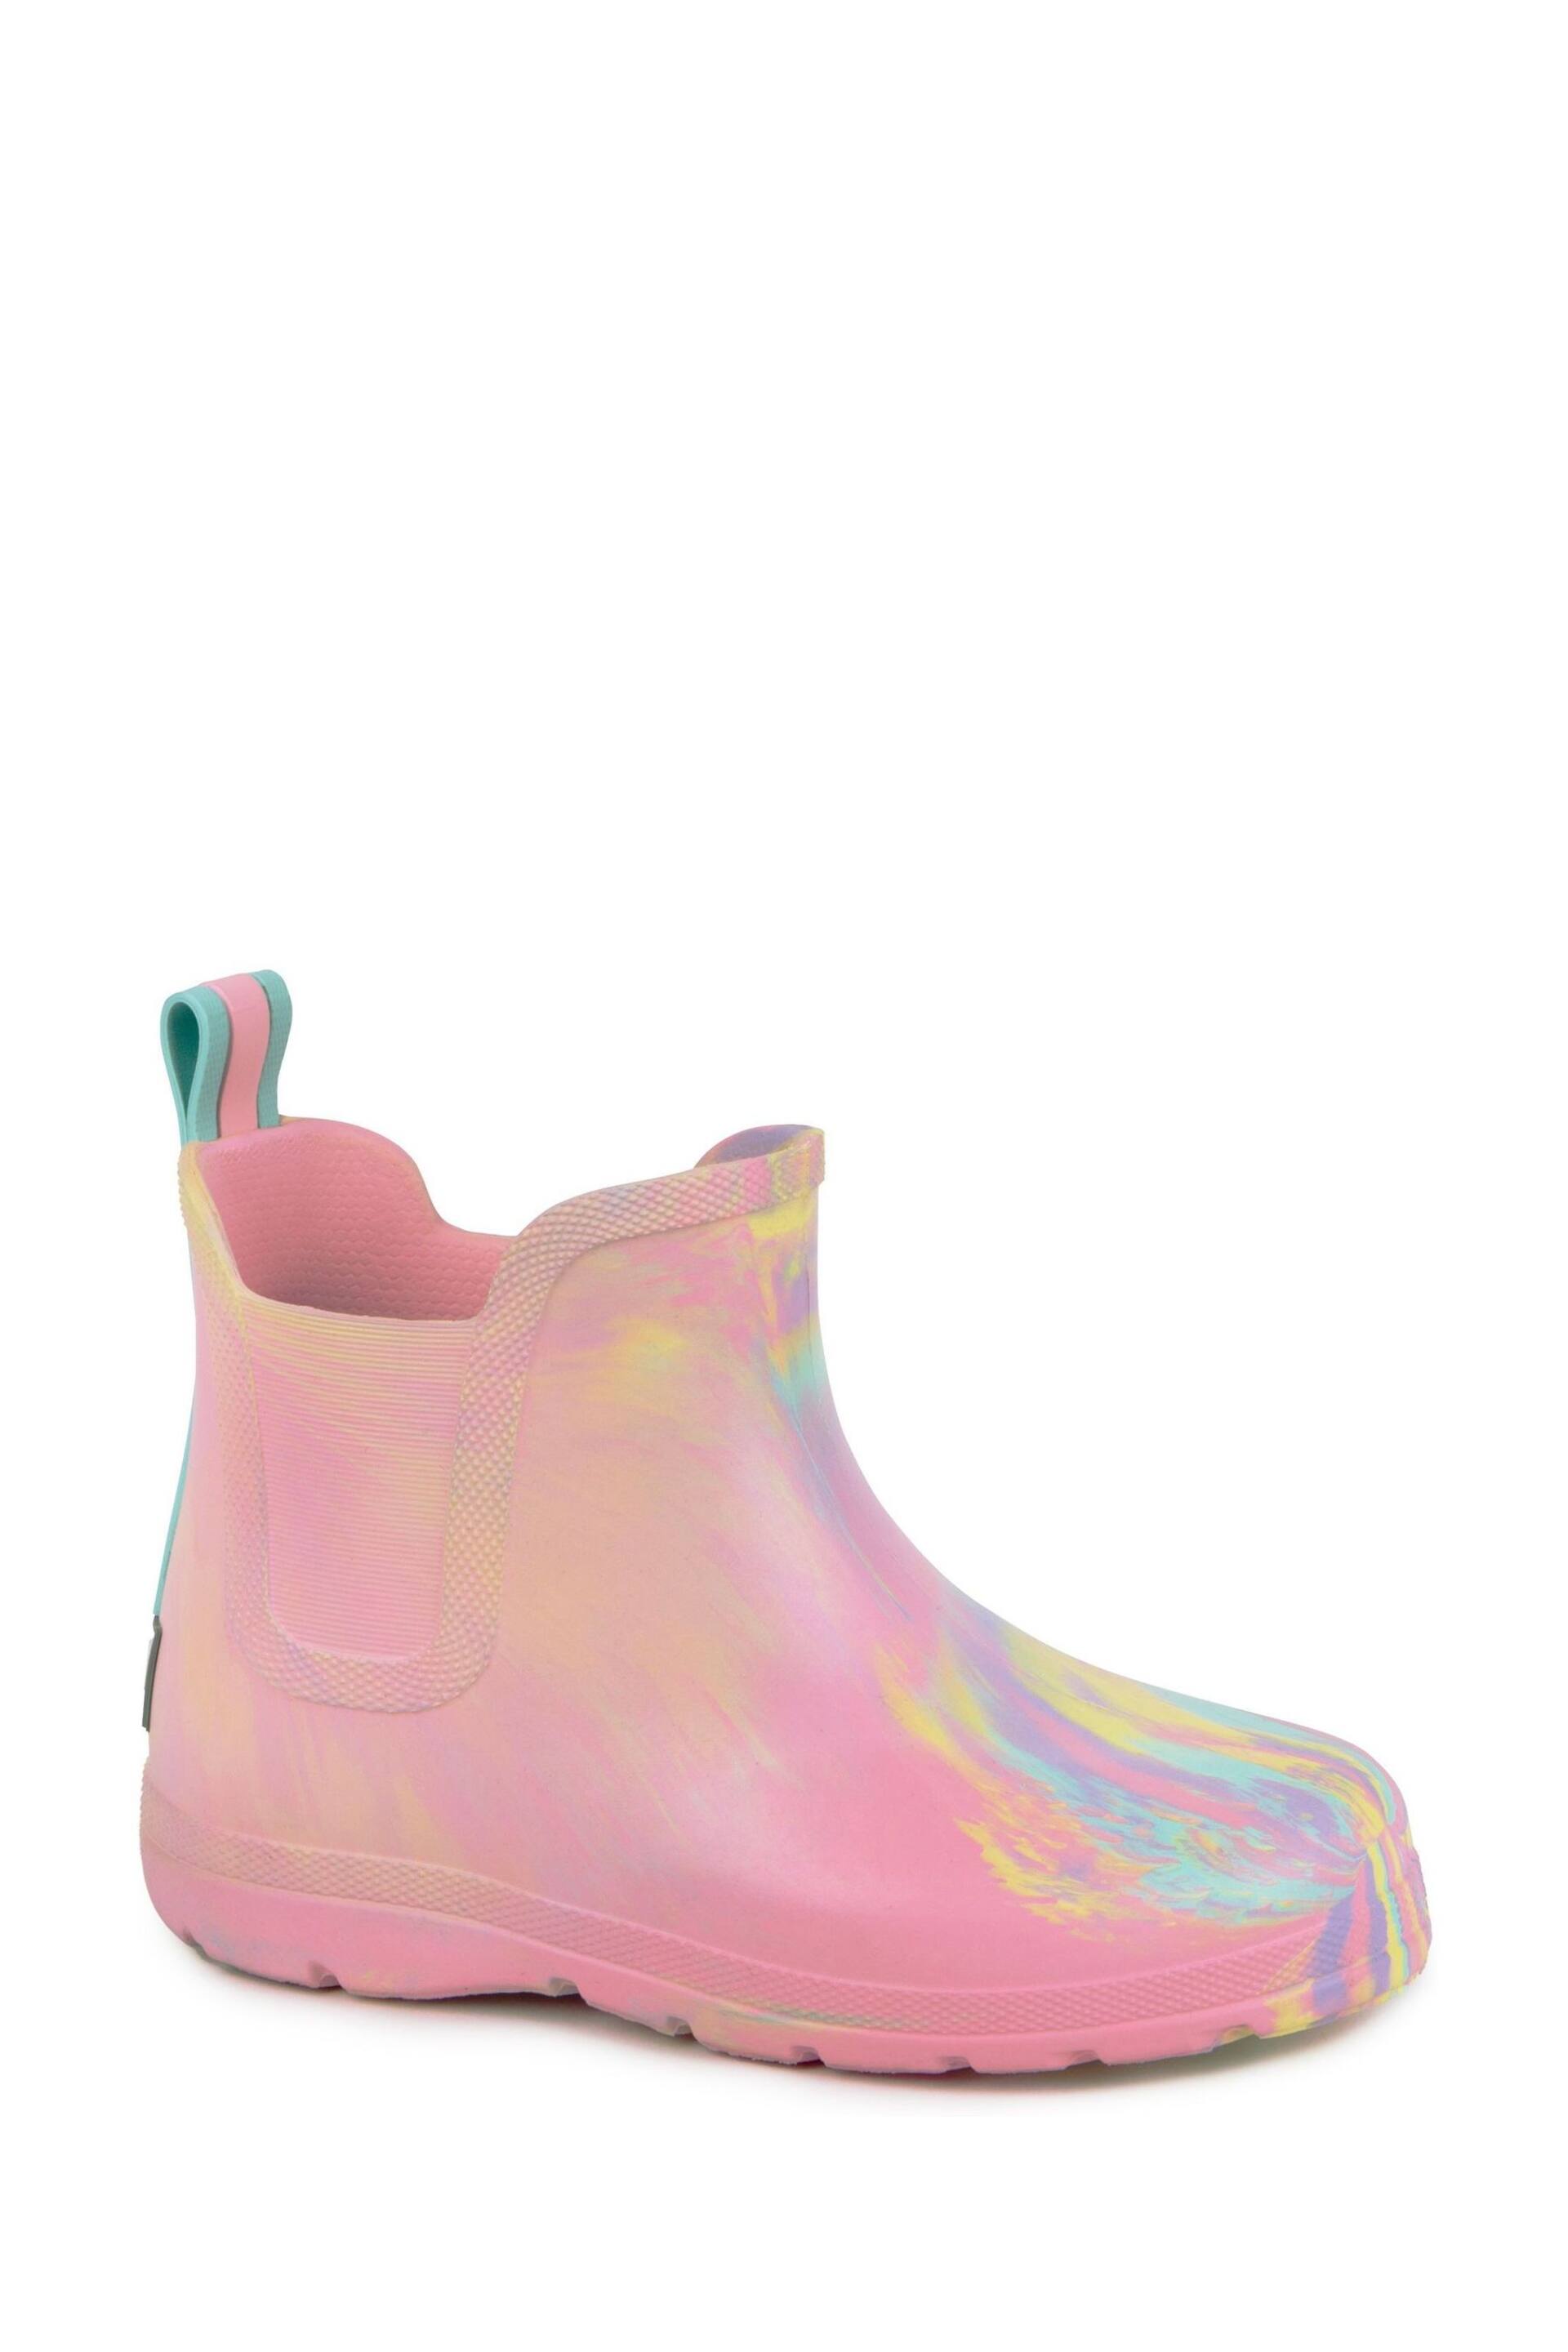 Totes Pink Childrens Chelsea Welly Boots - Image 3 of 5